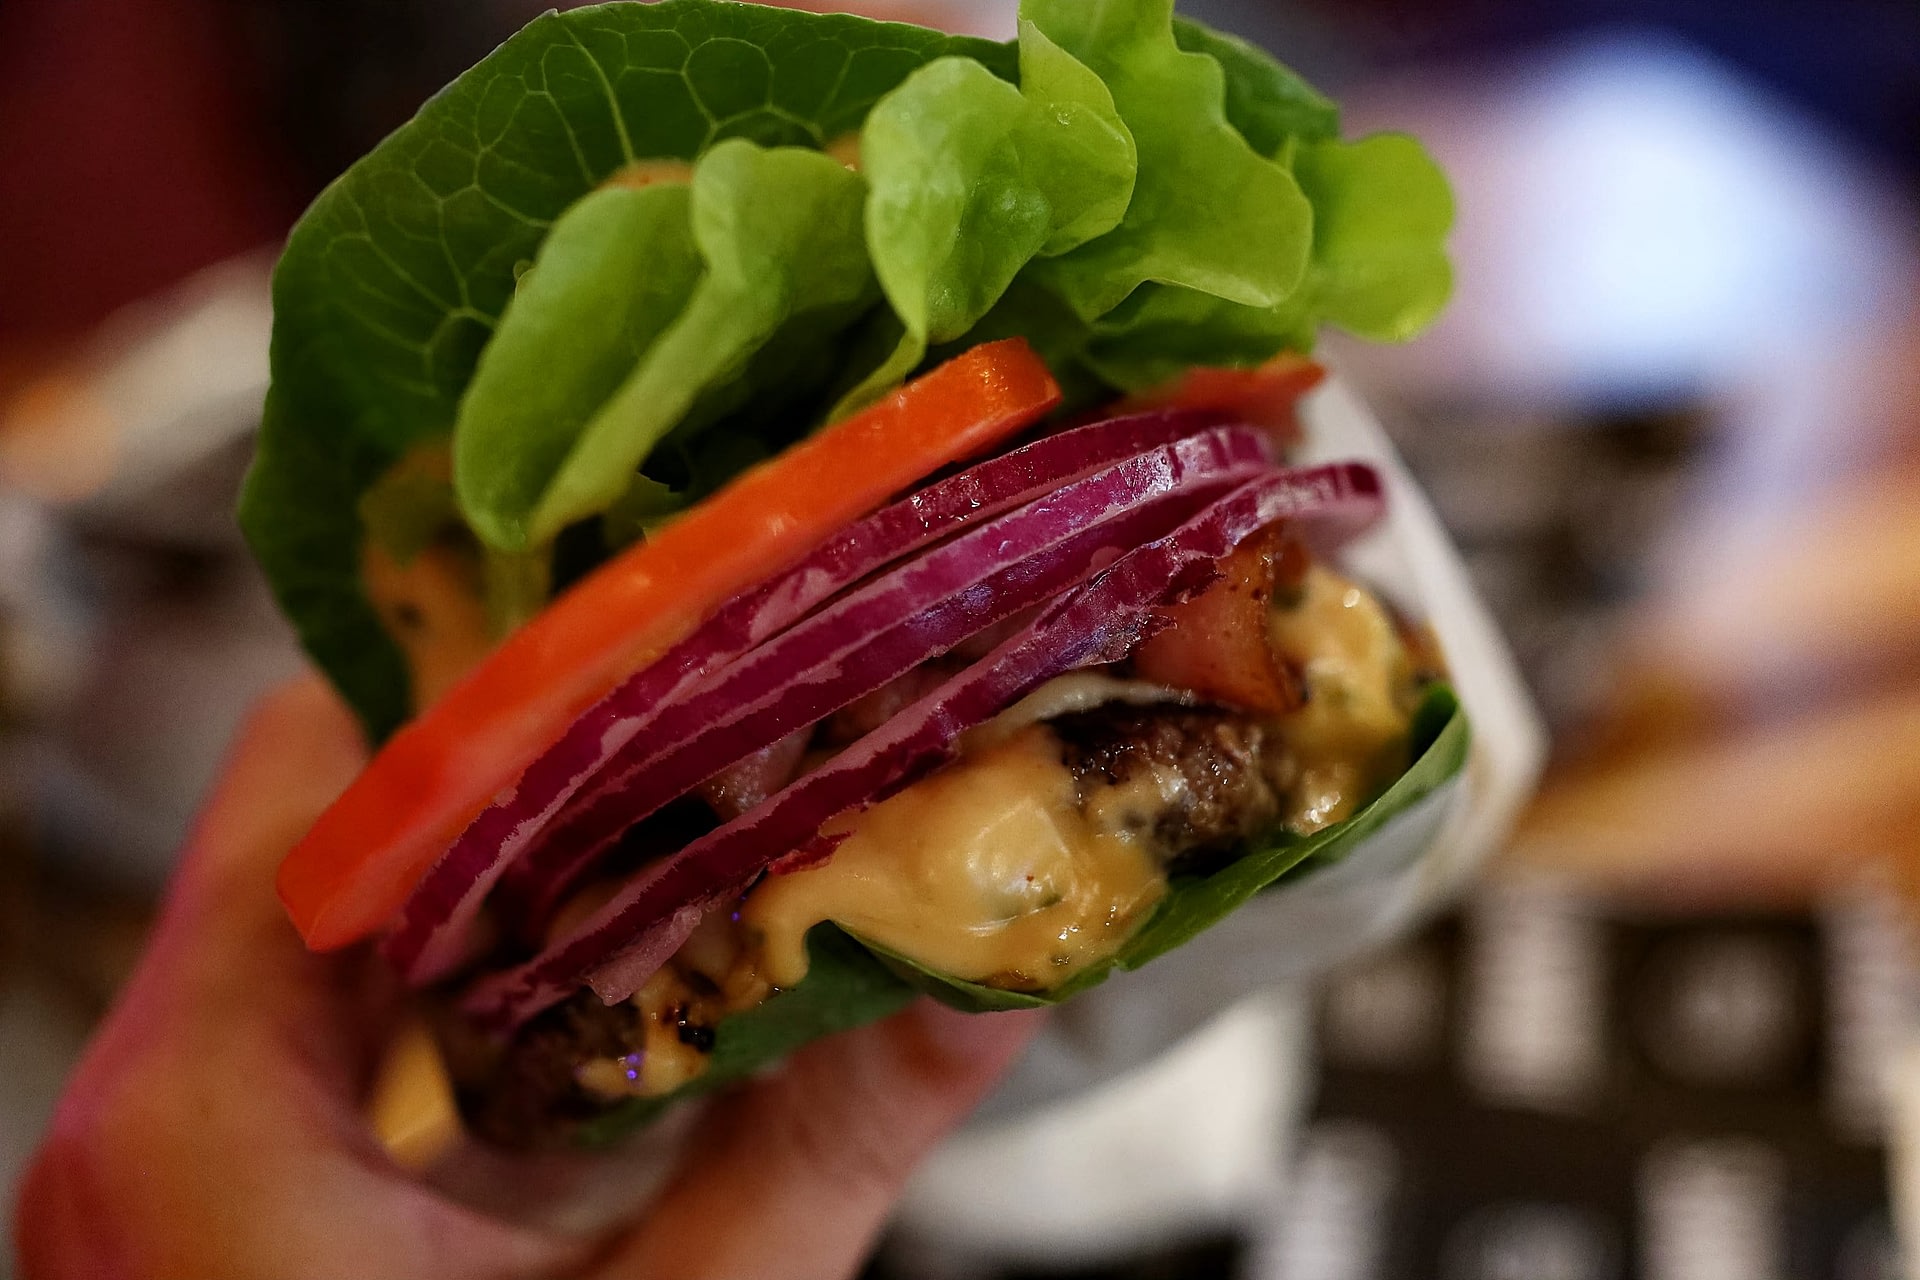 A cheeseburger and veggies wrapped in a lettuce bun